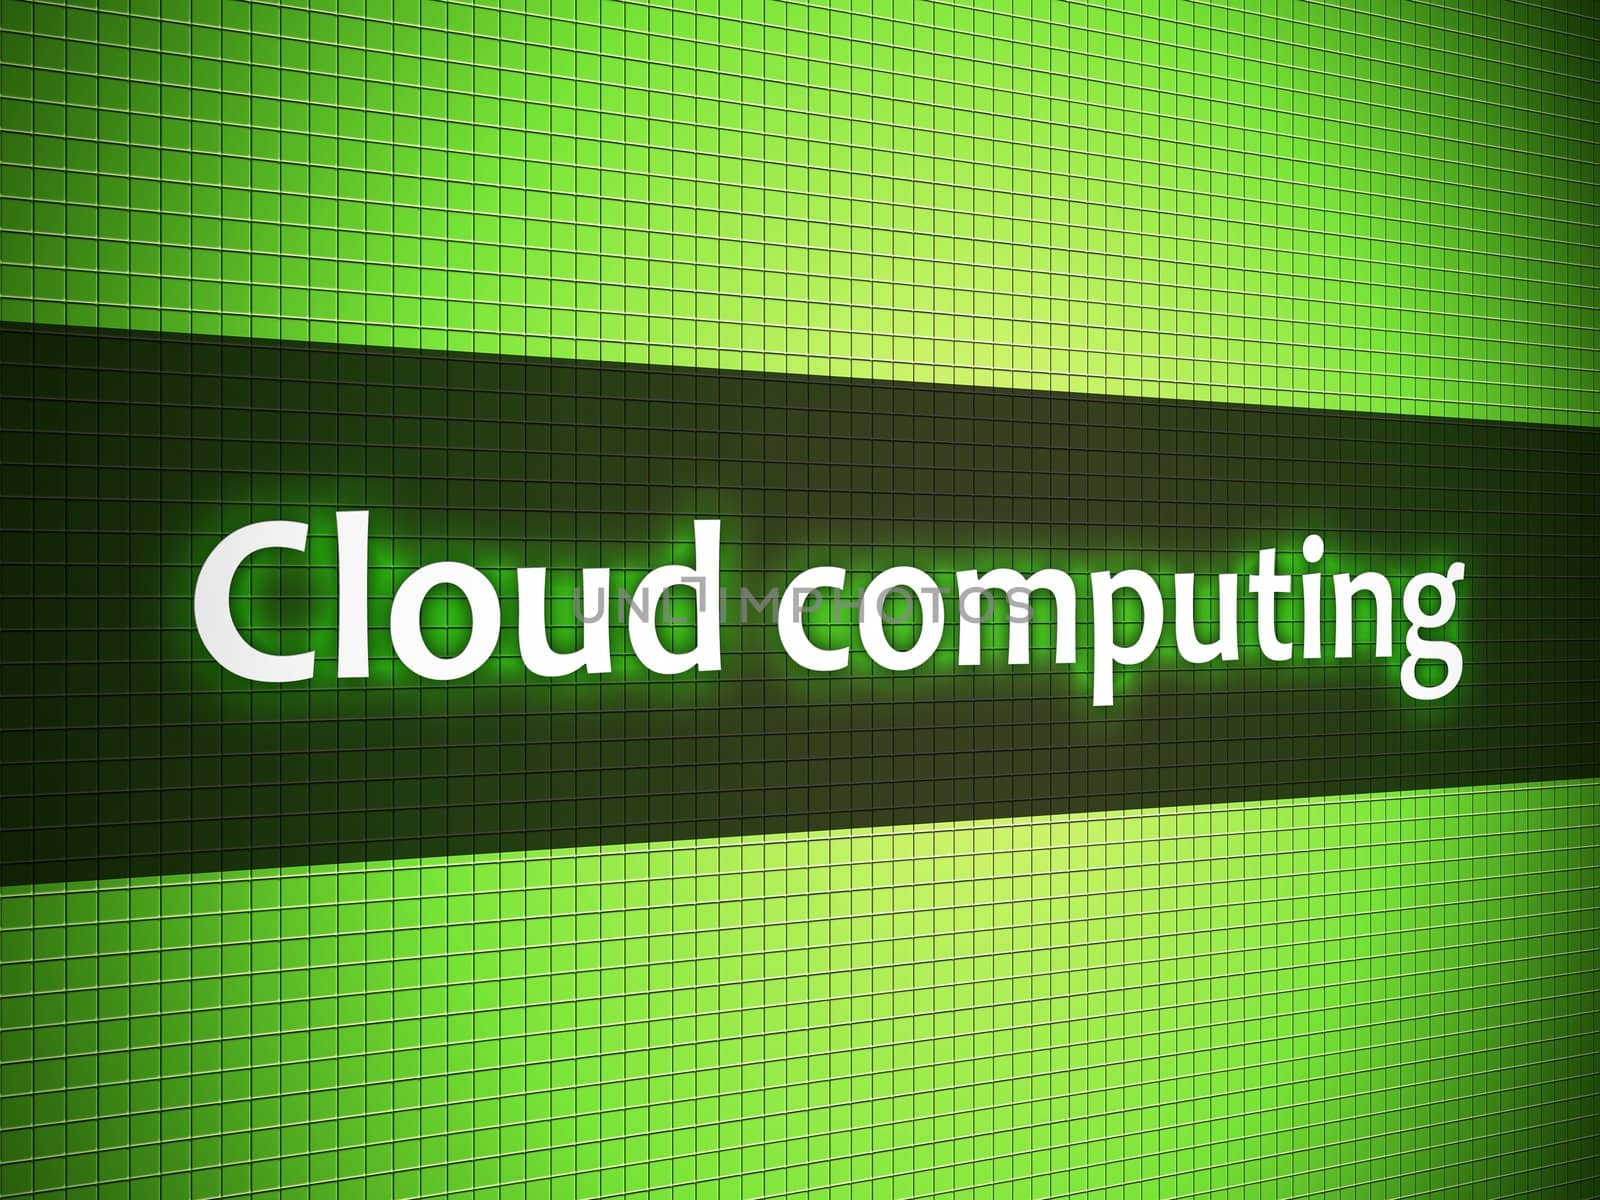 Cloud computing words on lcd-styled display